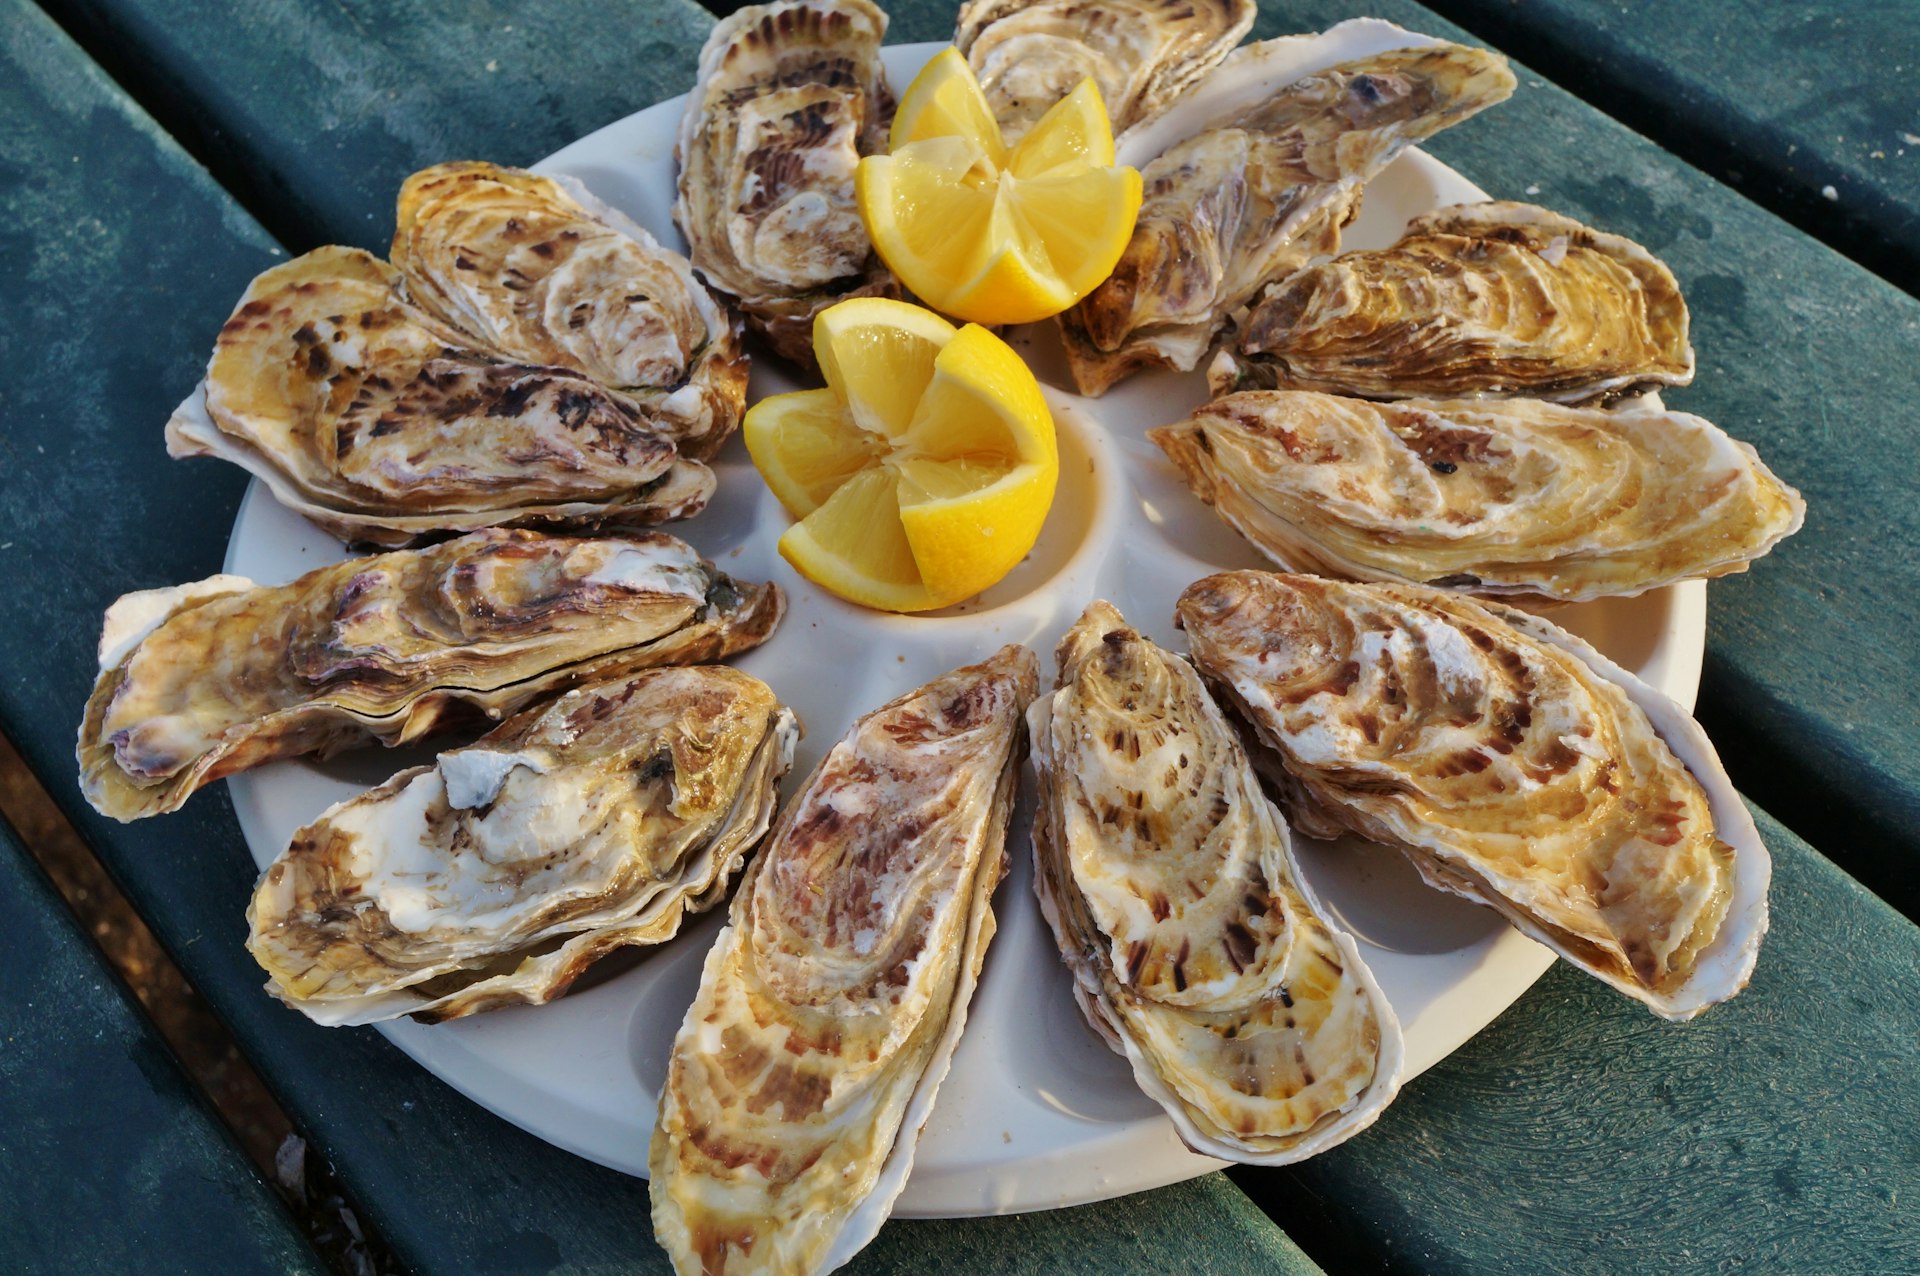 Plate of freshly shucked oysters in Brittany, France